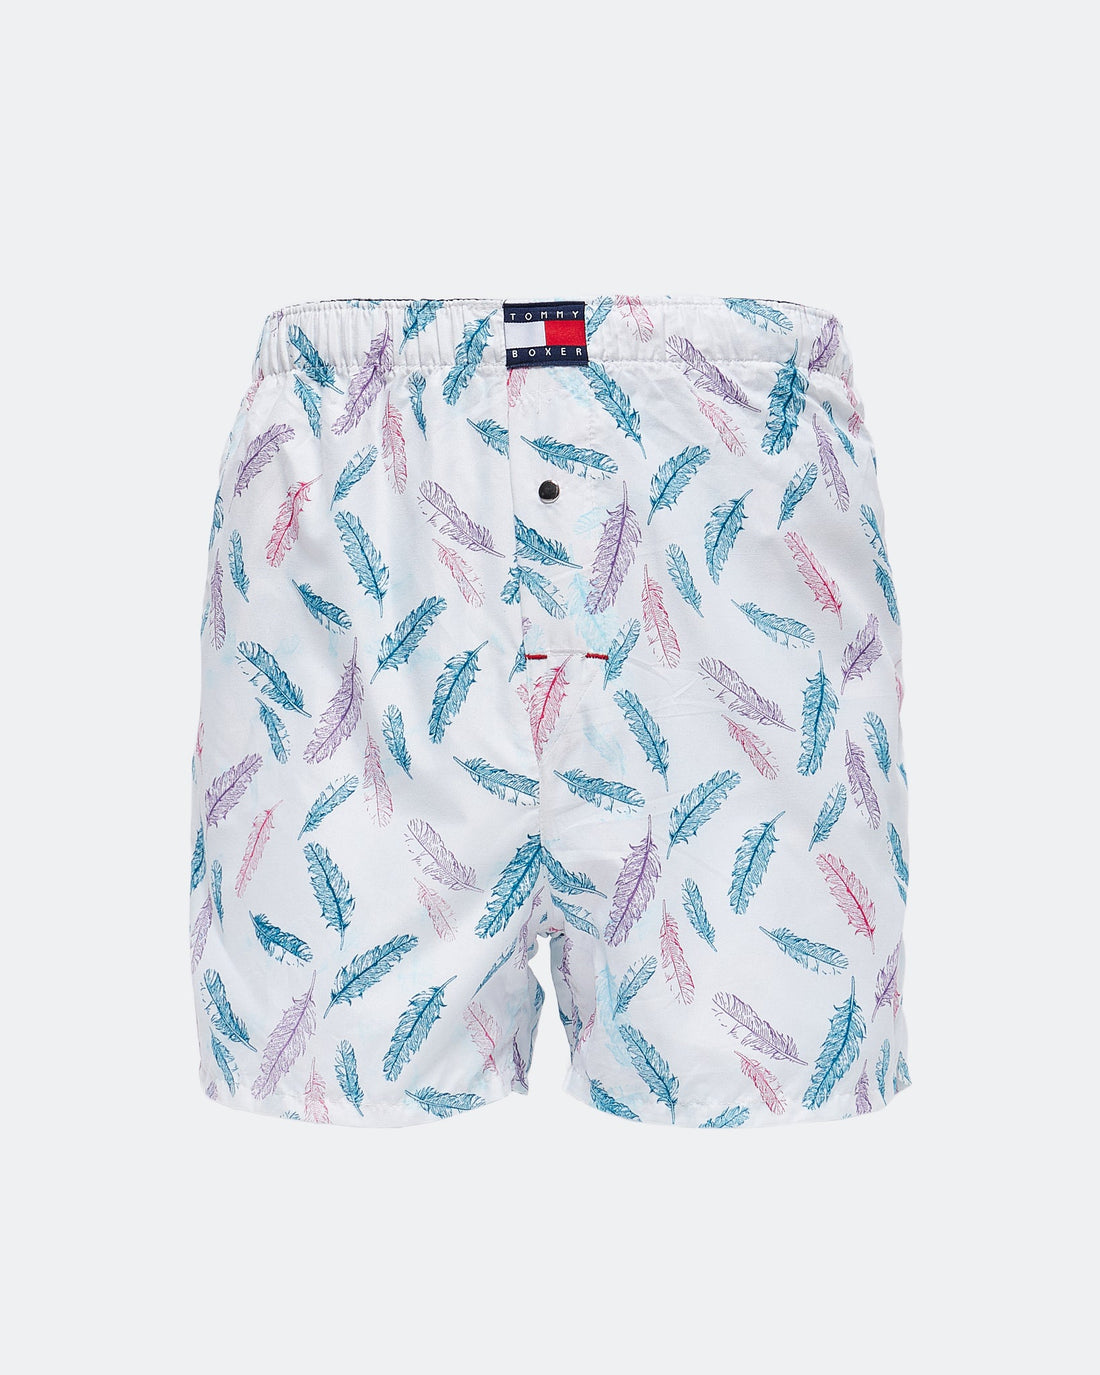 MOI OUTFIT-Leaf Over Printed Men Boxer 6.90